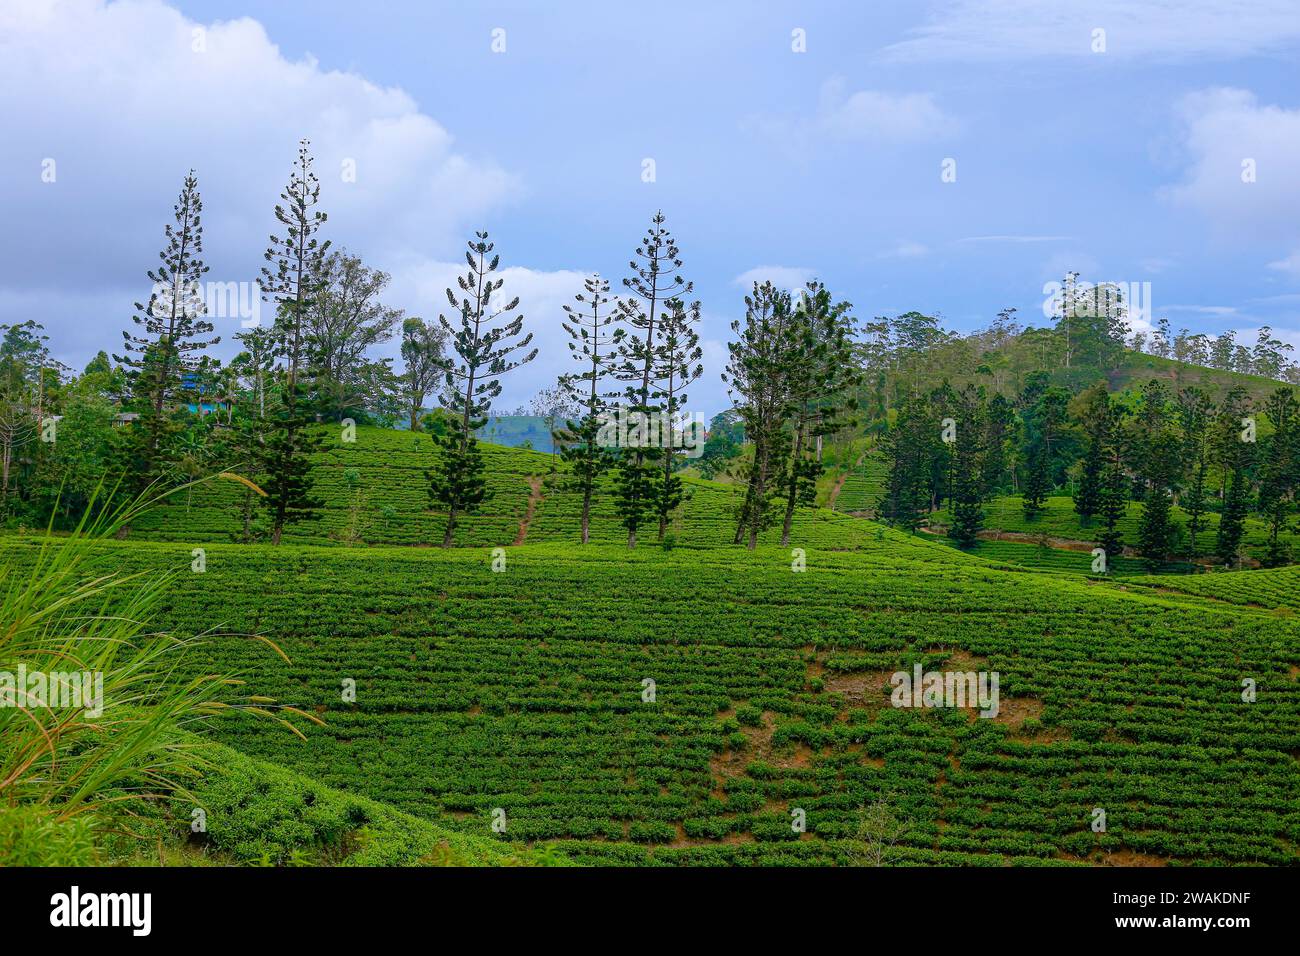 Pine trees are found growing between tea plantations in the highlands of Sri Lanka Stock Photo